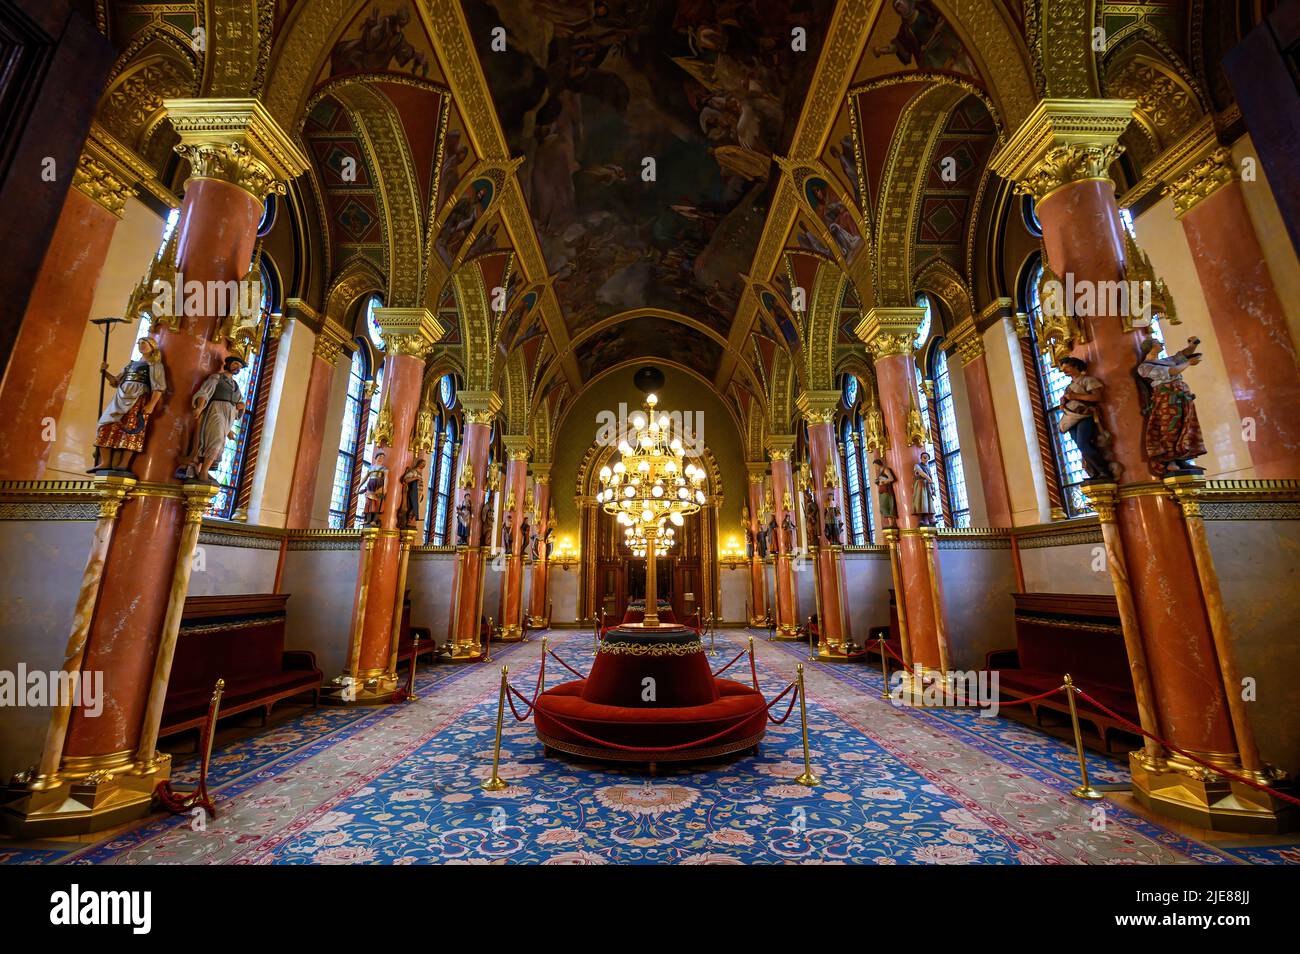 Budapest, Hungary. Interior of the Hungarian Parliament building Stock Photo